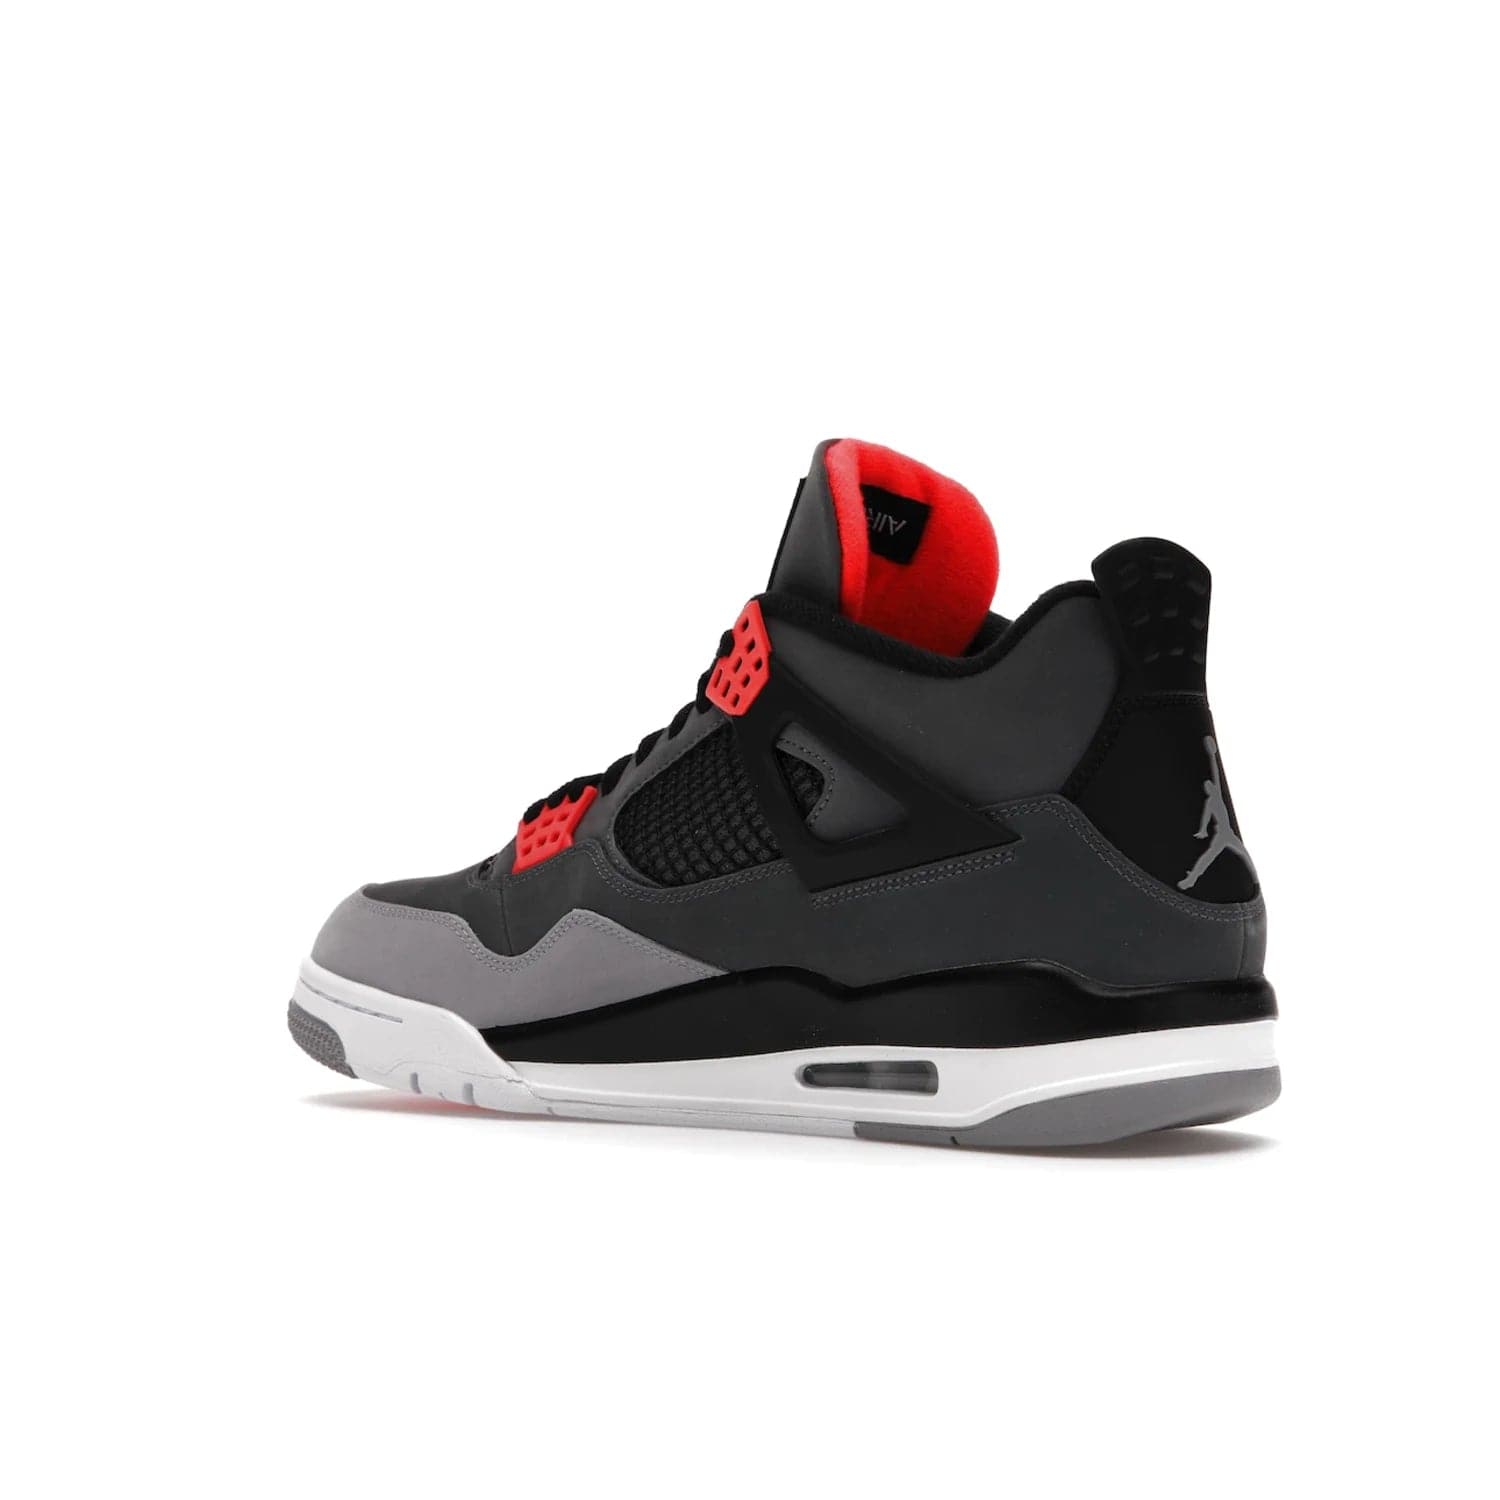 Jordan 4 Retro Infrared - Image 23 - Only at www.BallersClubKickz.com - Introducing the classic & timeless Air Jordan 4 Infrared. Durabuck upper, TPU mesh inserts, tech straps & heel tabs in dark grey and infrared accents. White sole with visible Air units. Out June 15, 2022. Get your pair now!